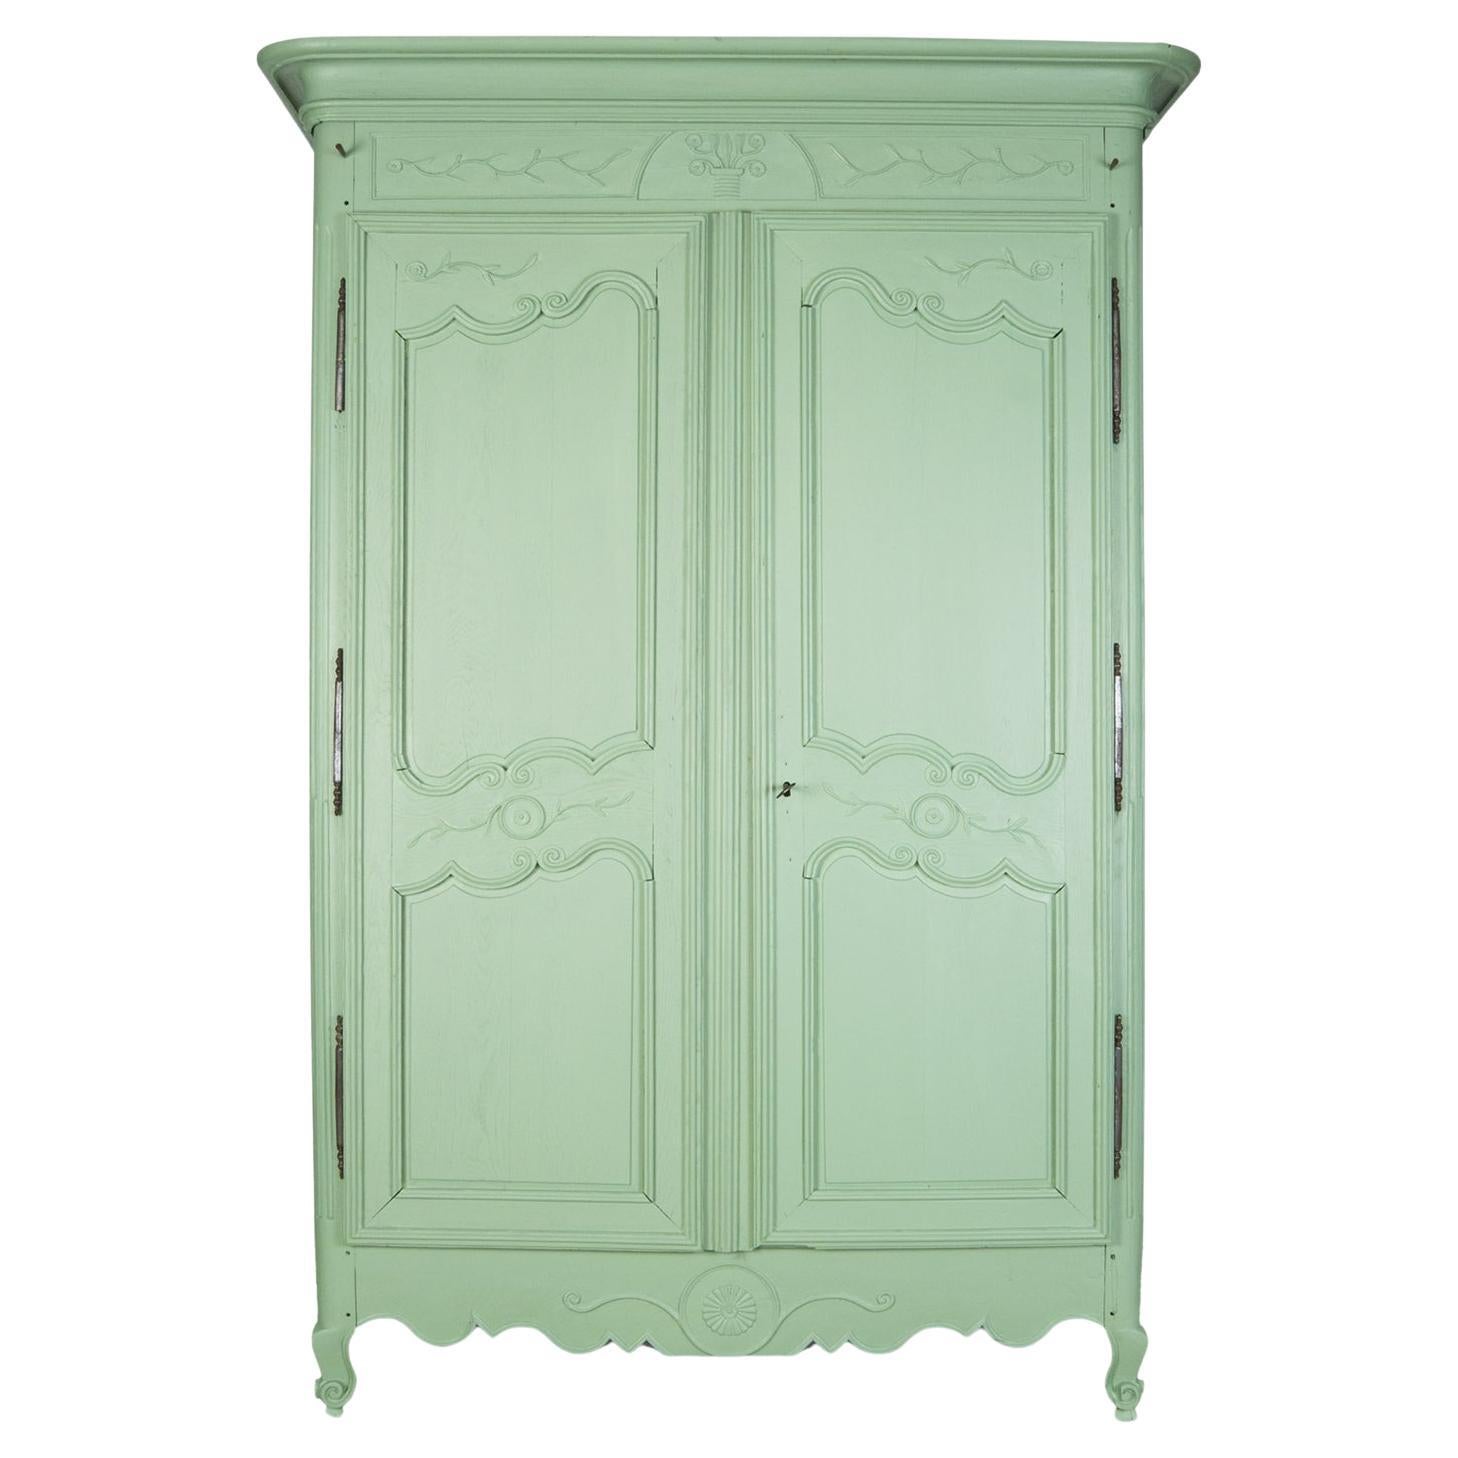 Lovely Antique 19th C Soft Green French Marriage Armoire or Wardrobe